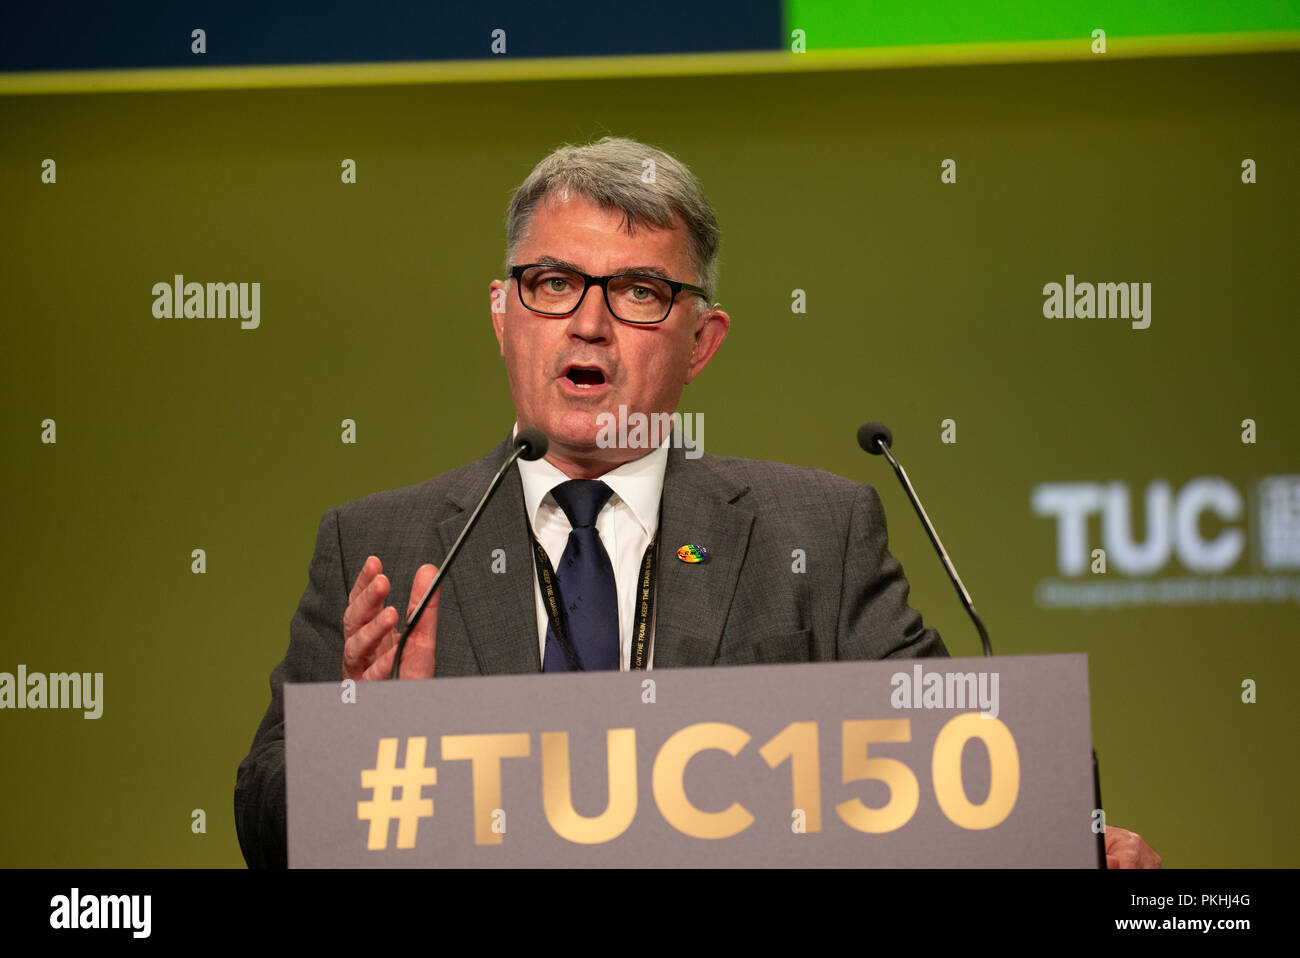 Mick Cash General Secretary Of The National Union Of Rail Maritime And Transport Workers Or The Rmt Speaks At The Tuc Conference In Manchester Stock Photo Alamy